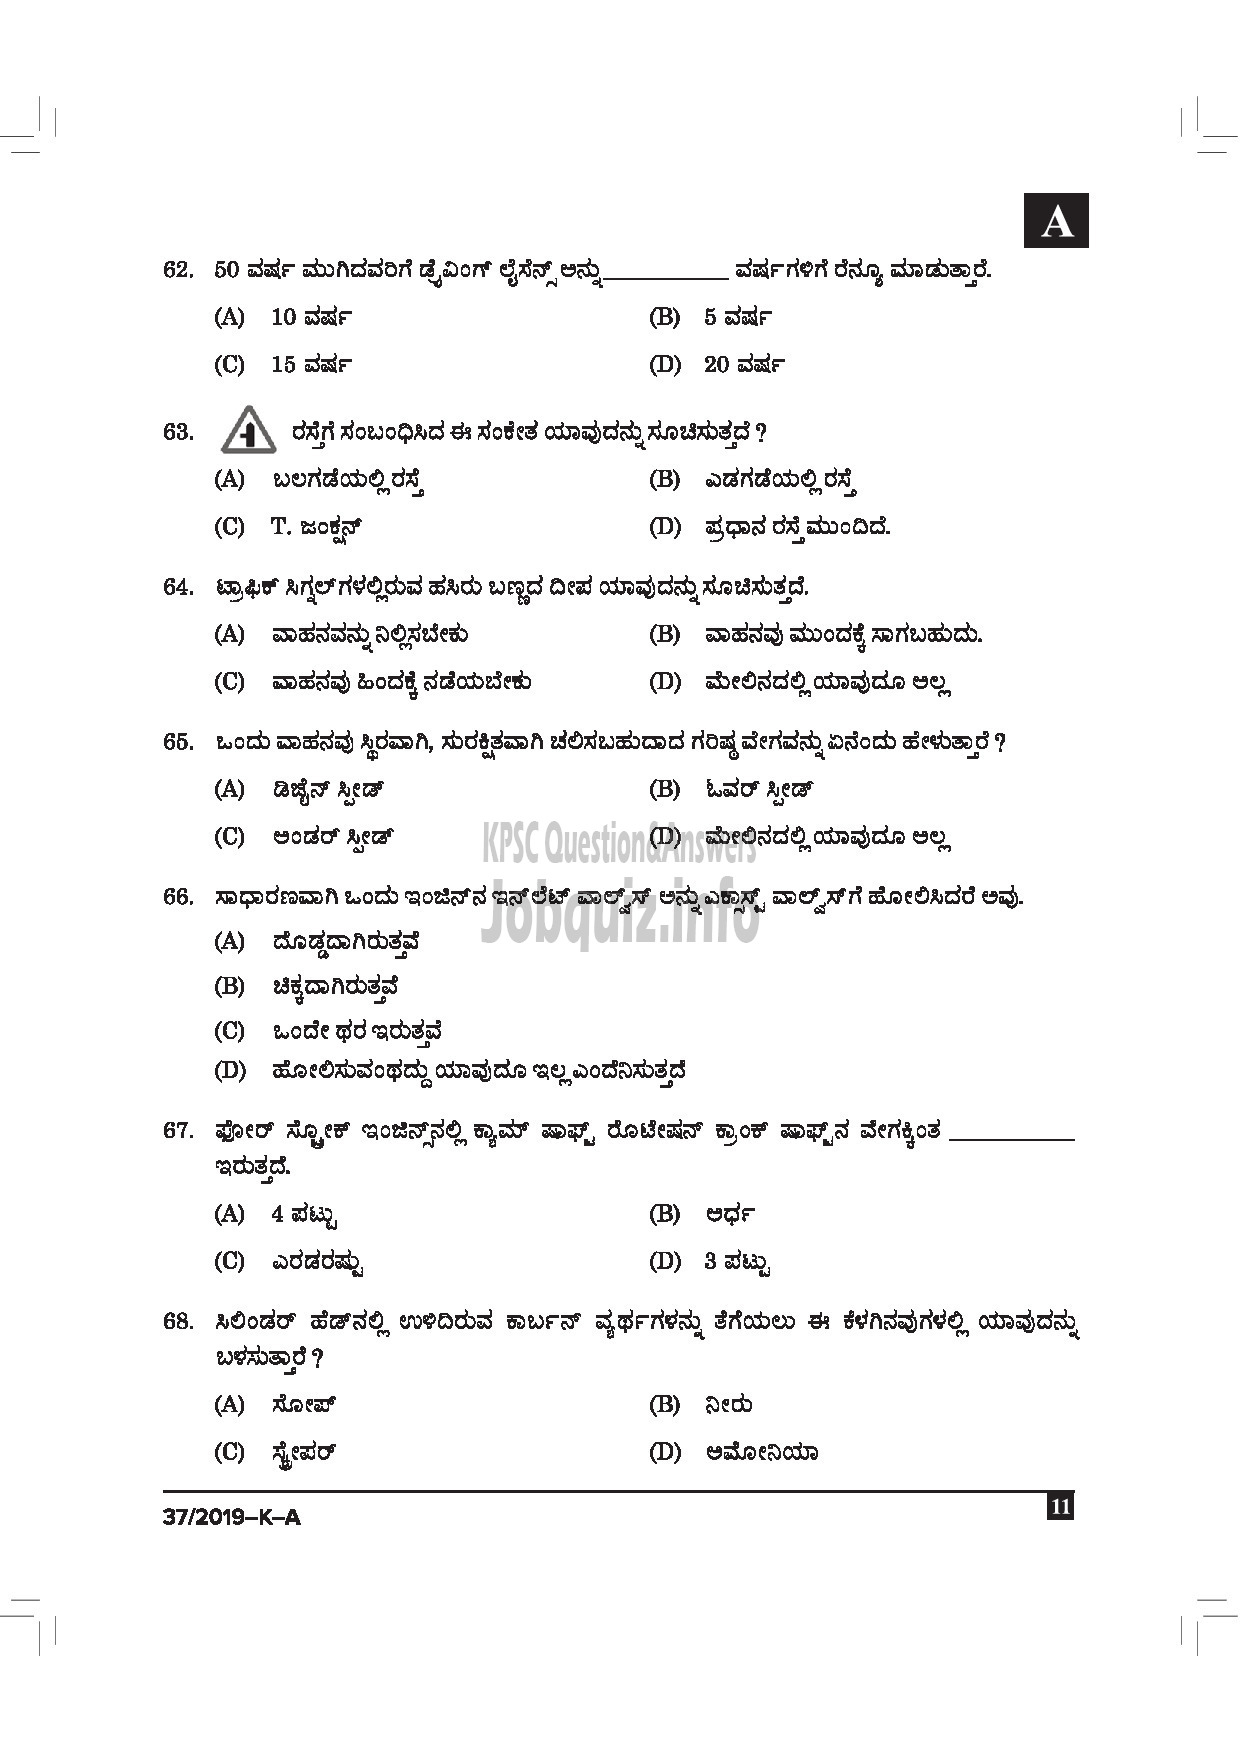 Kerala PSC Question Paper - DRIVER CUM OFFICE ATTENDANT / POLICE CONSTABLE DRIVER GOVT OWNED COMP / CORP / BOARD / POLICE KANNADA -11